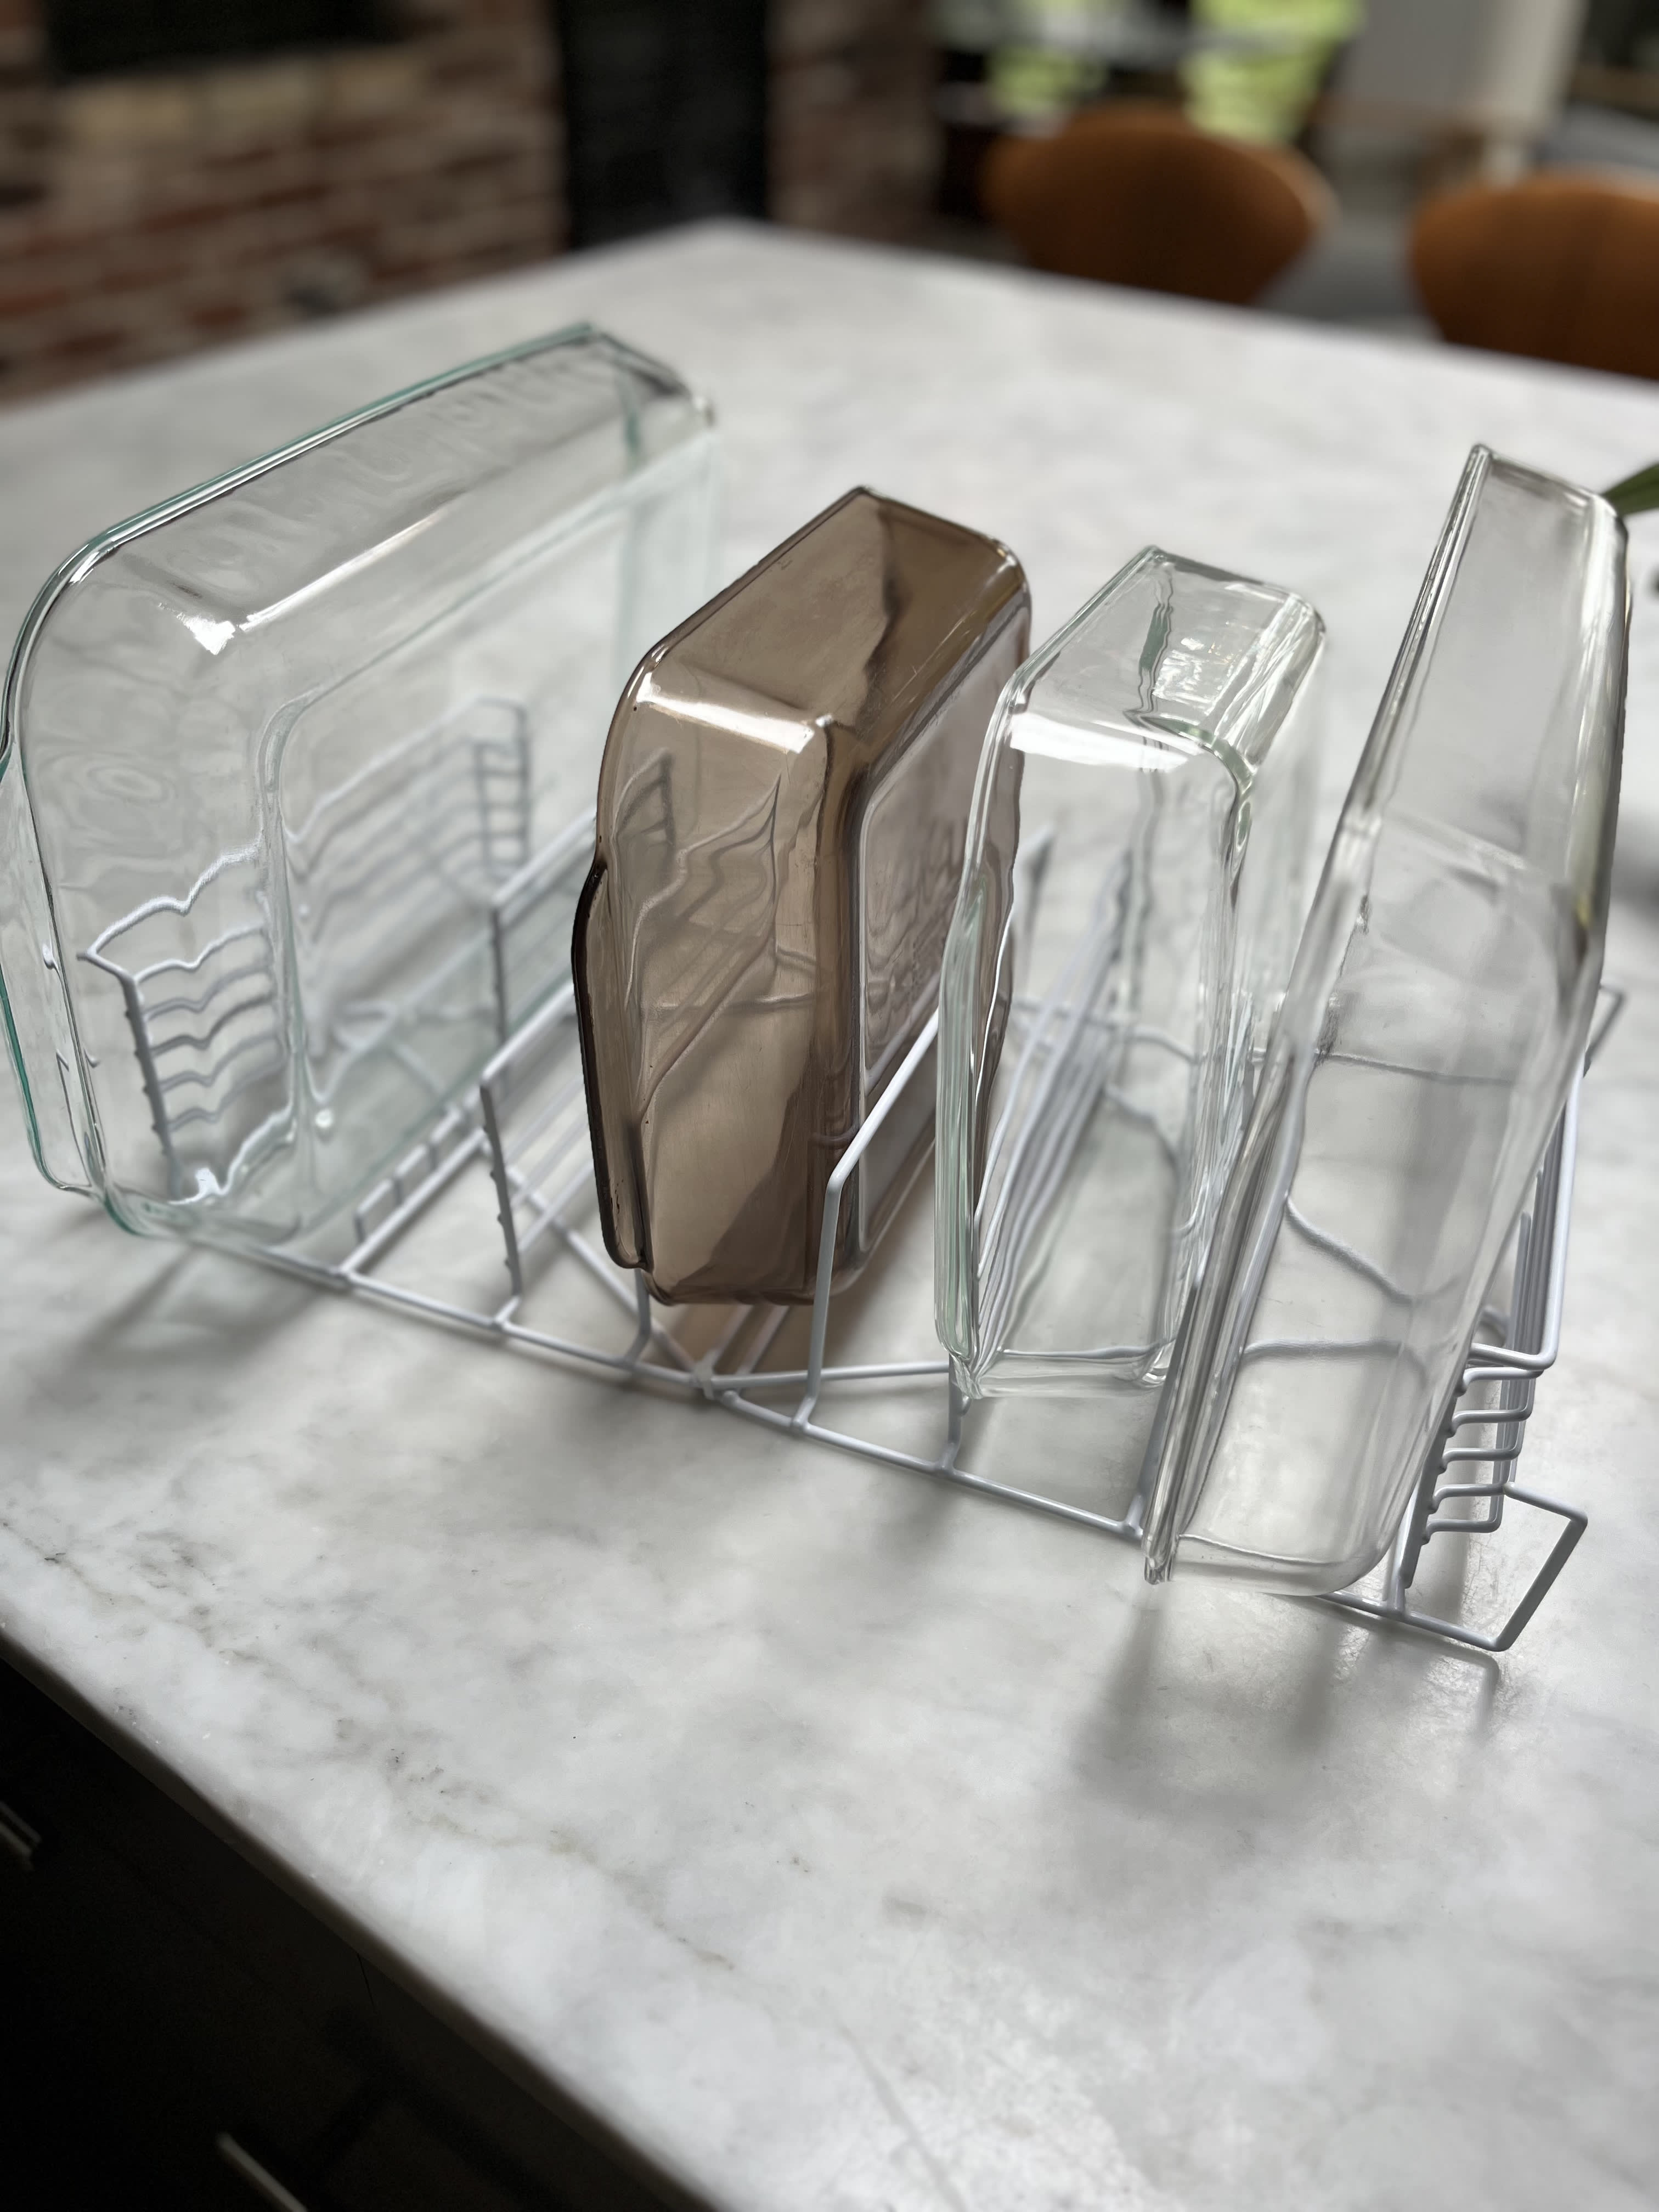 Why You Should Keep a Shower Caddy in Your Kitchen